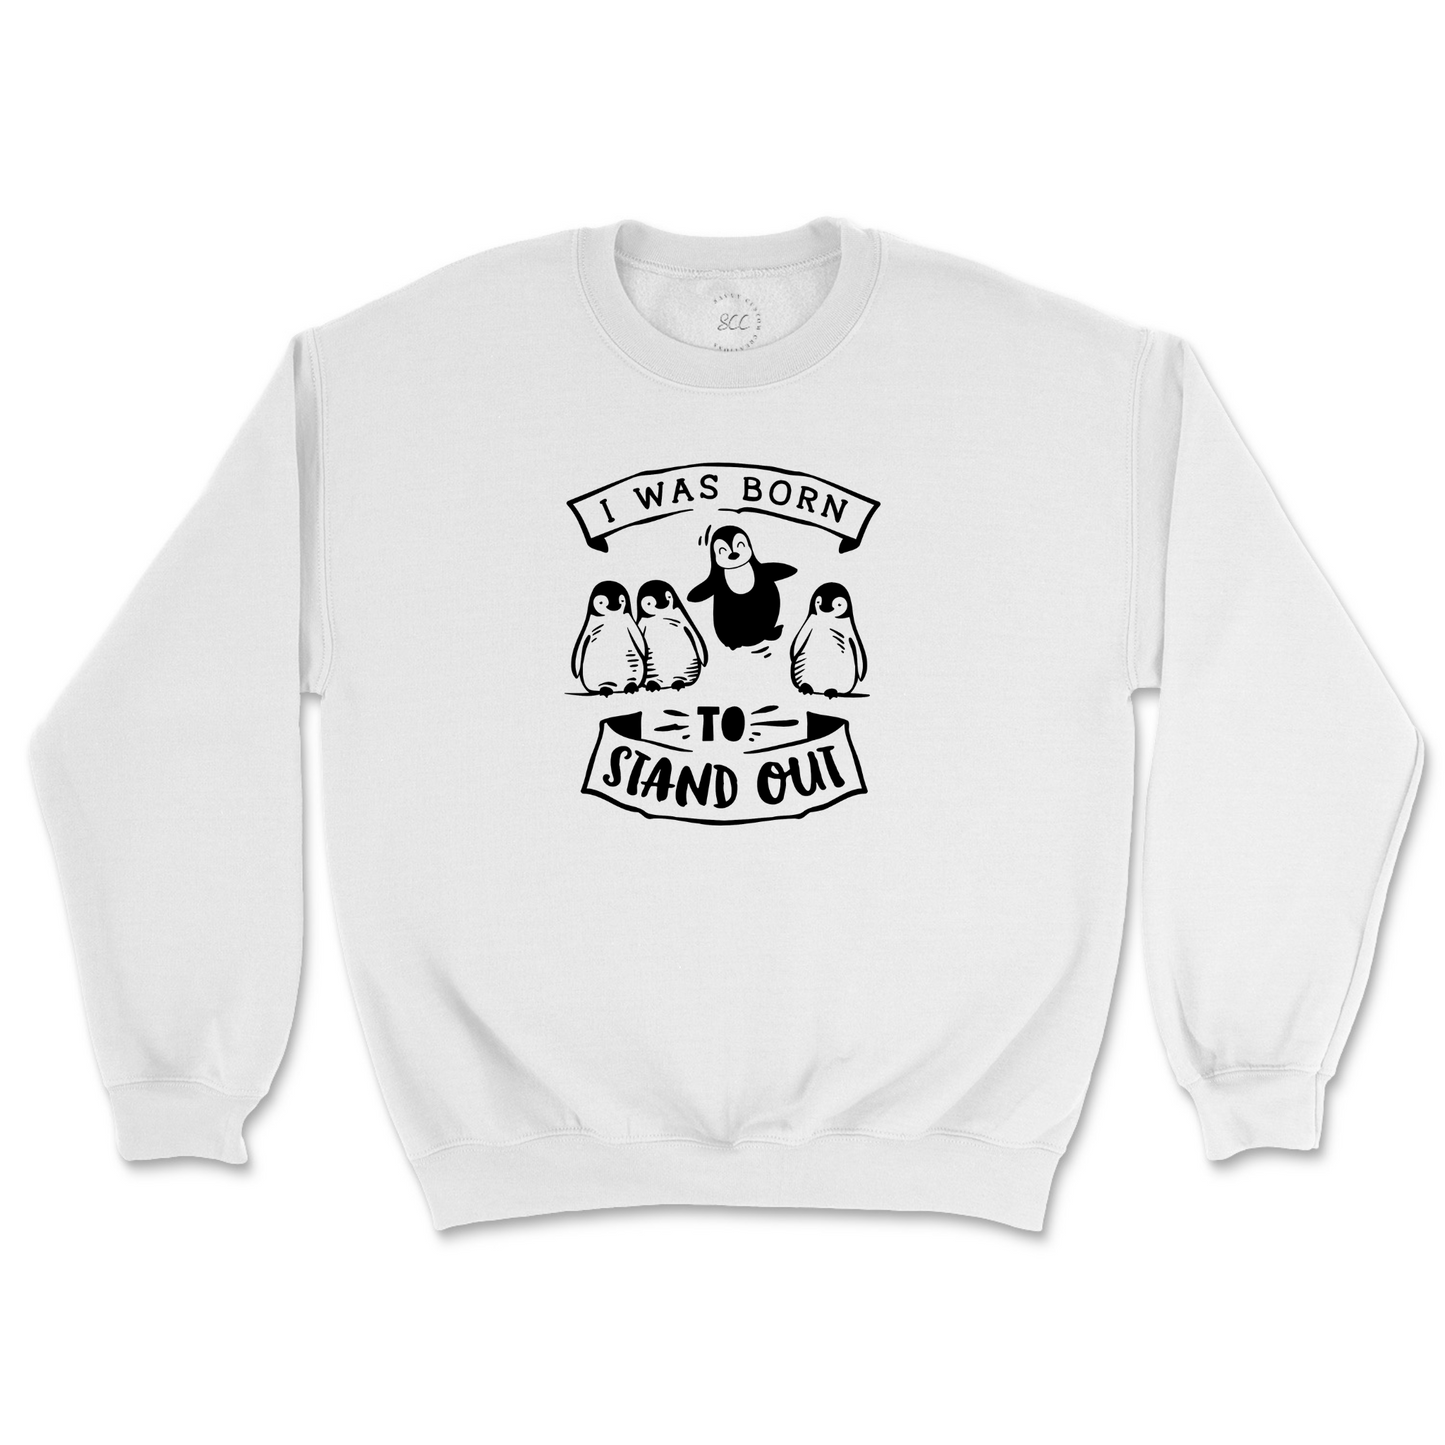 I WAS BORN TO STAND OUT - Unisex Sweatshirt